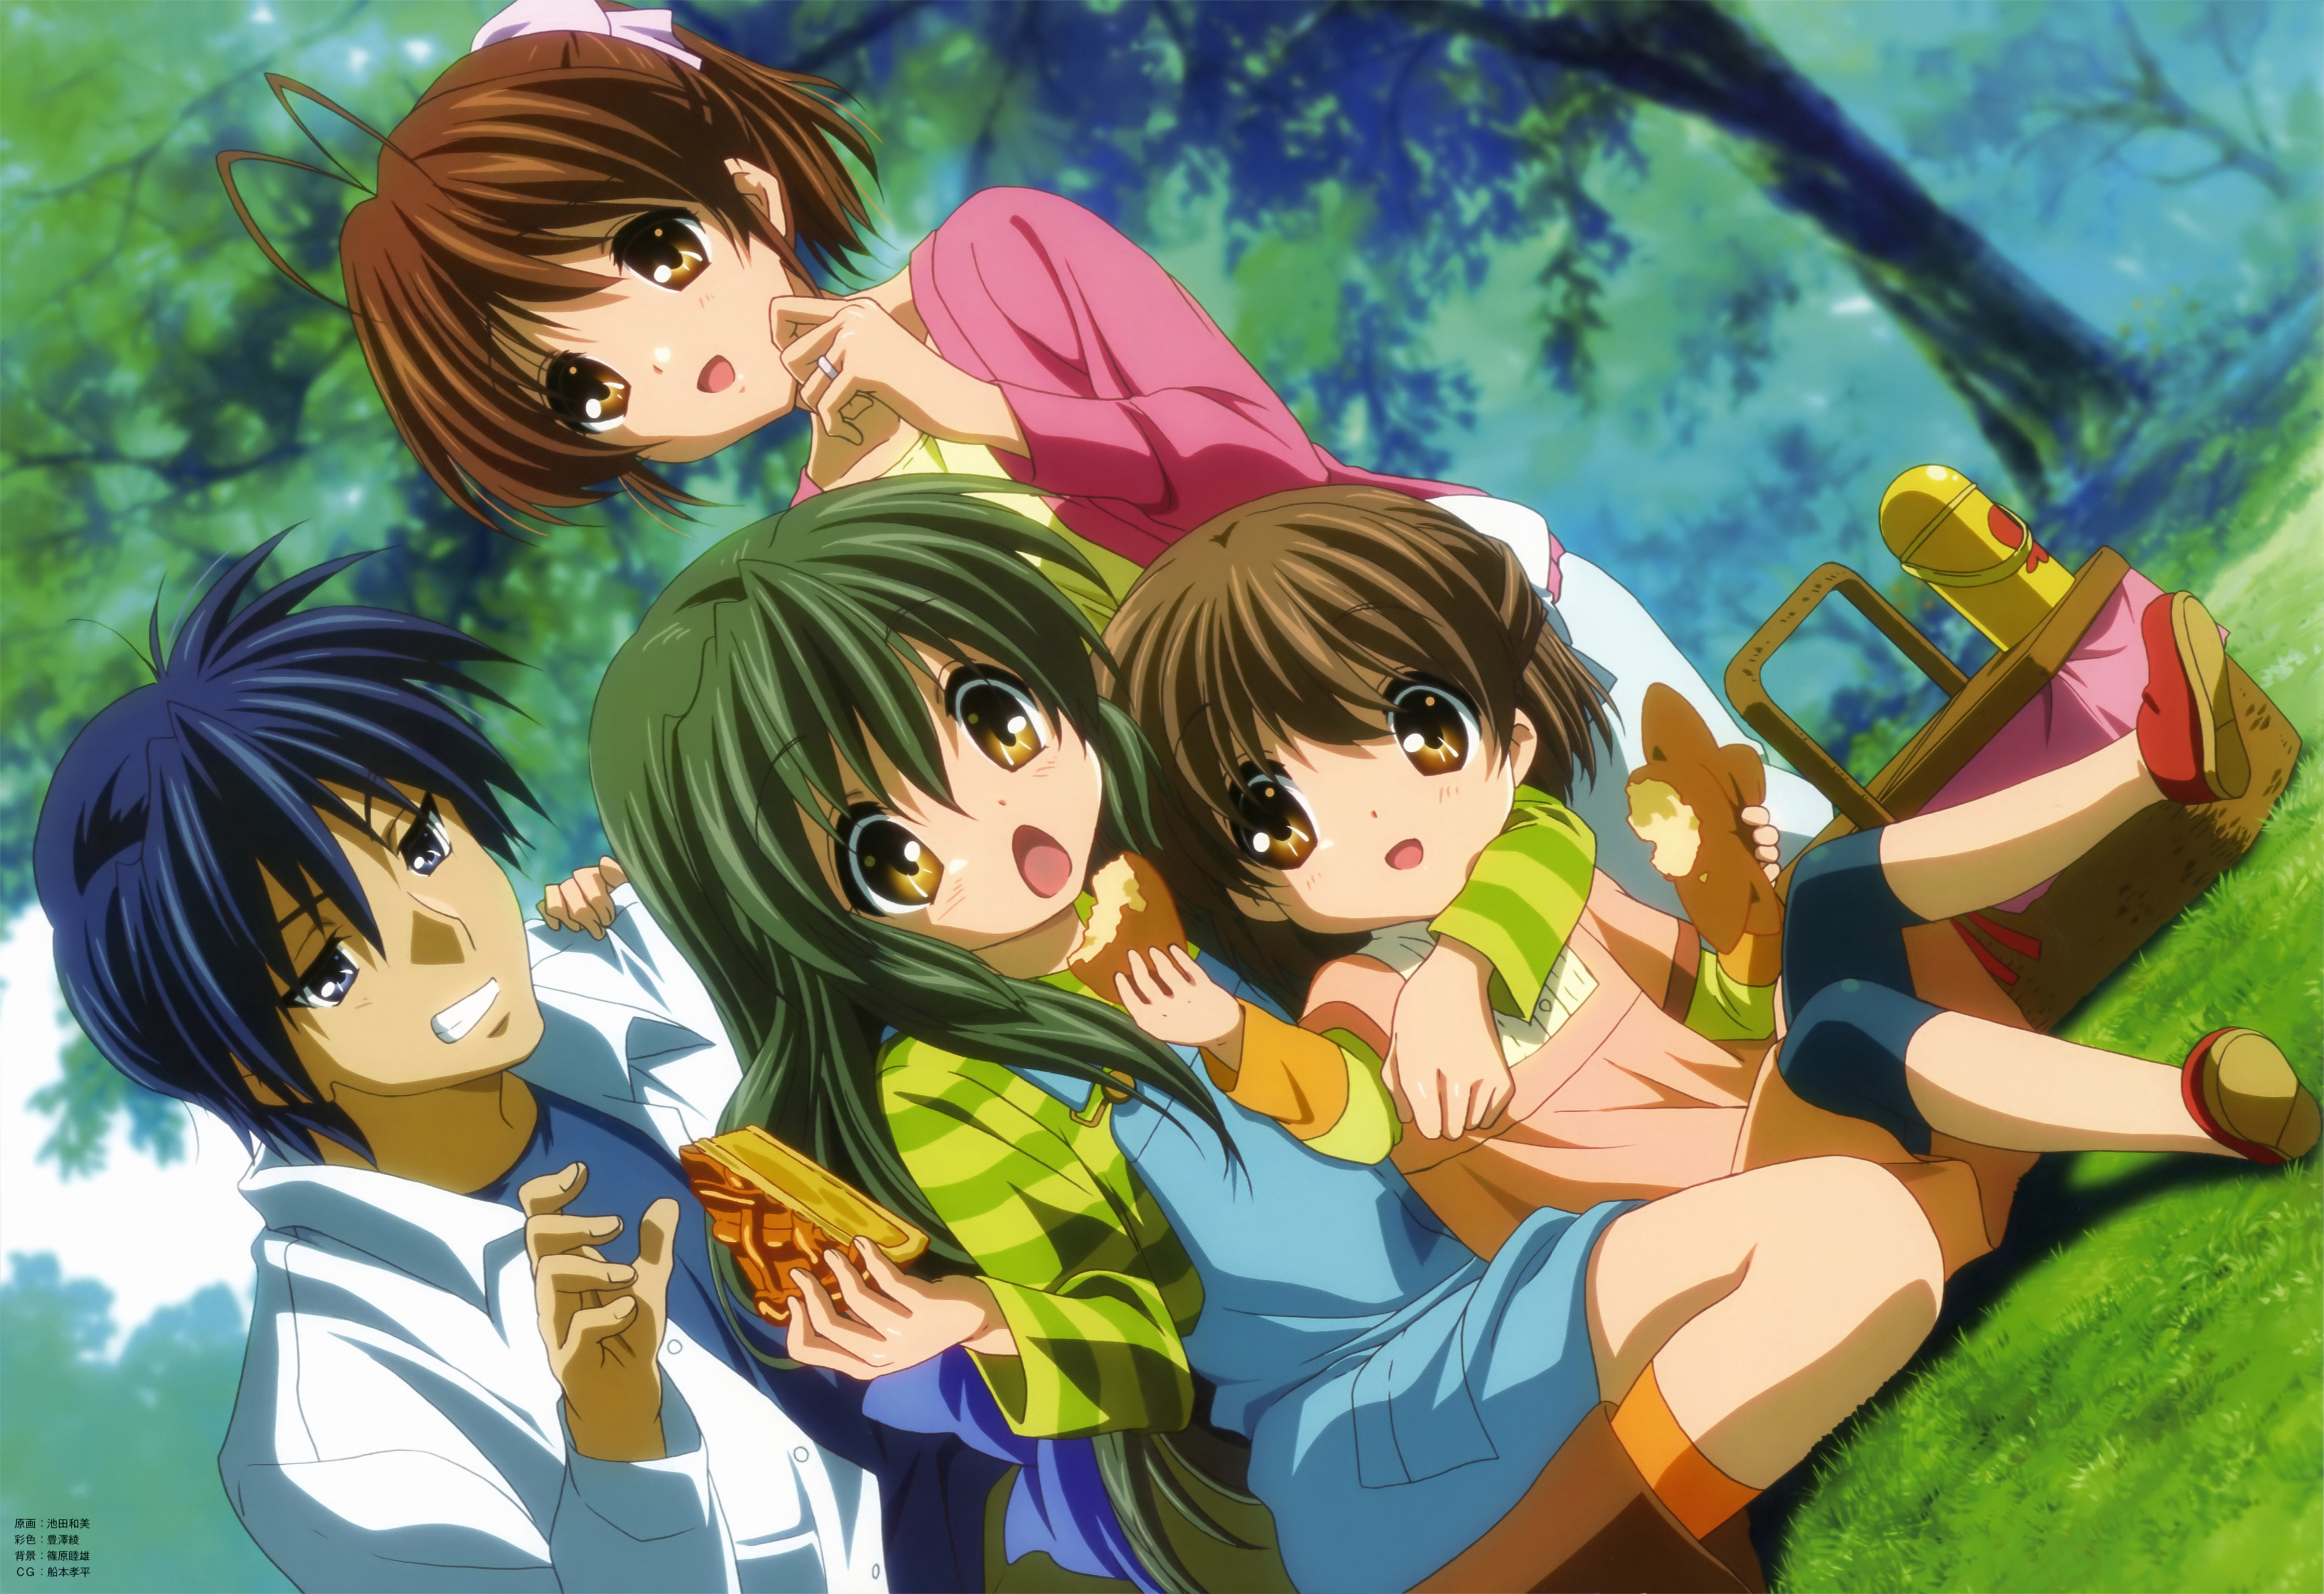 Clannad After Story Wallpapers